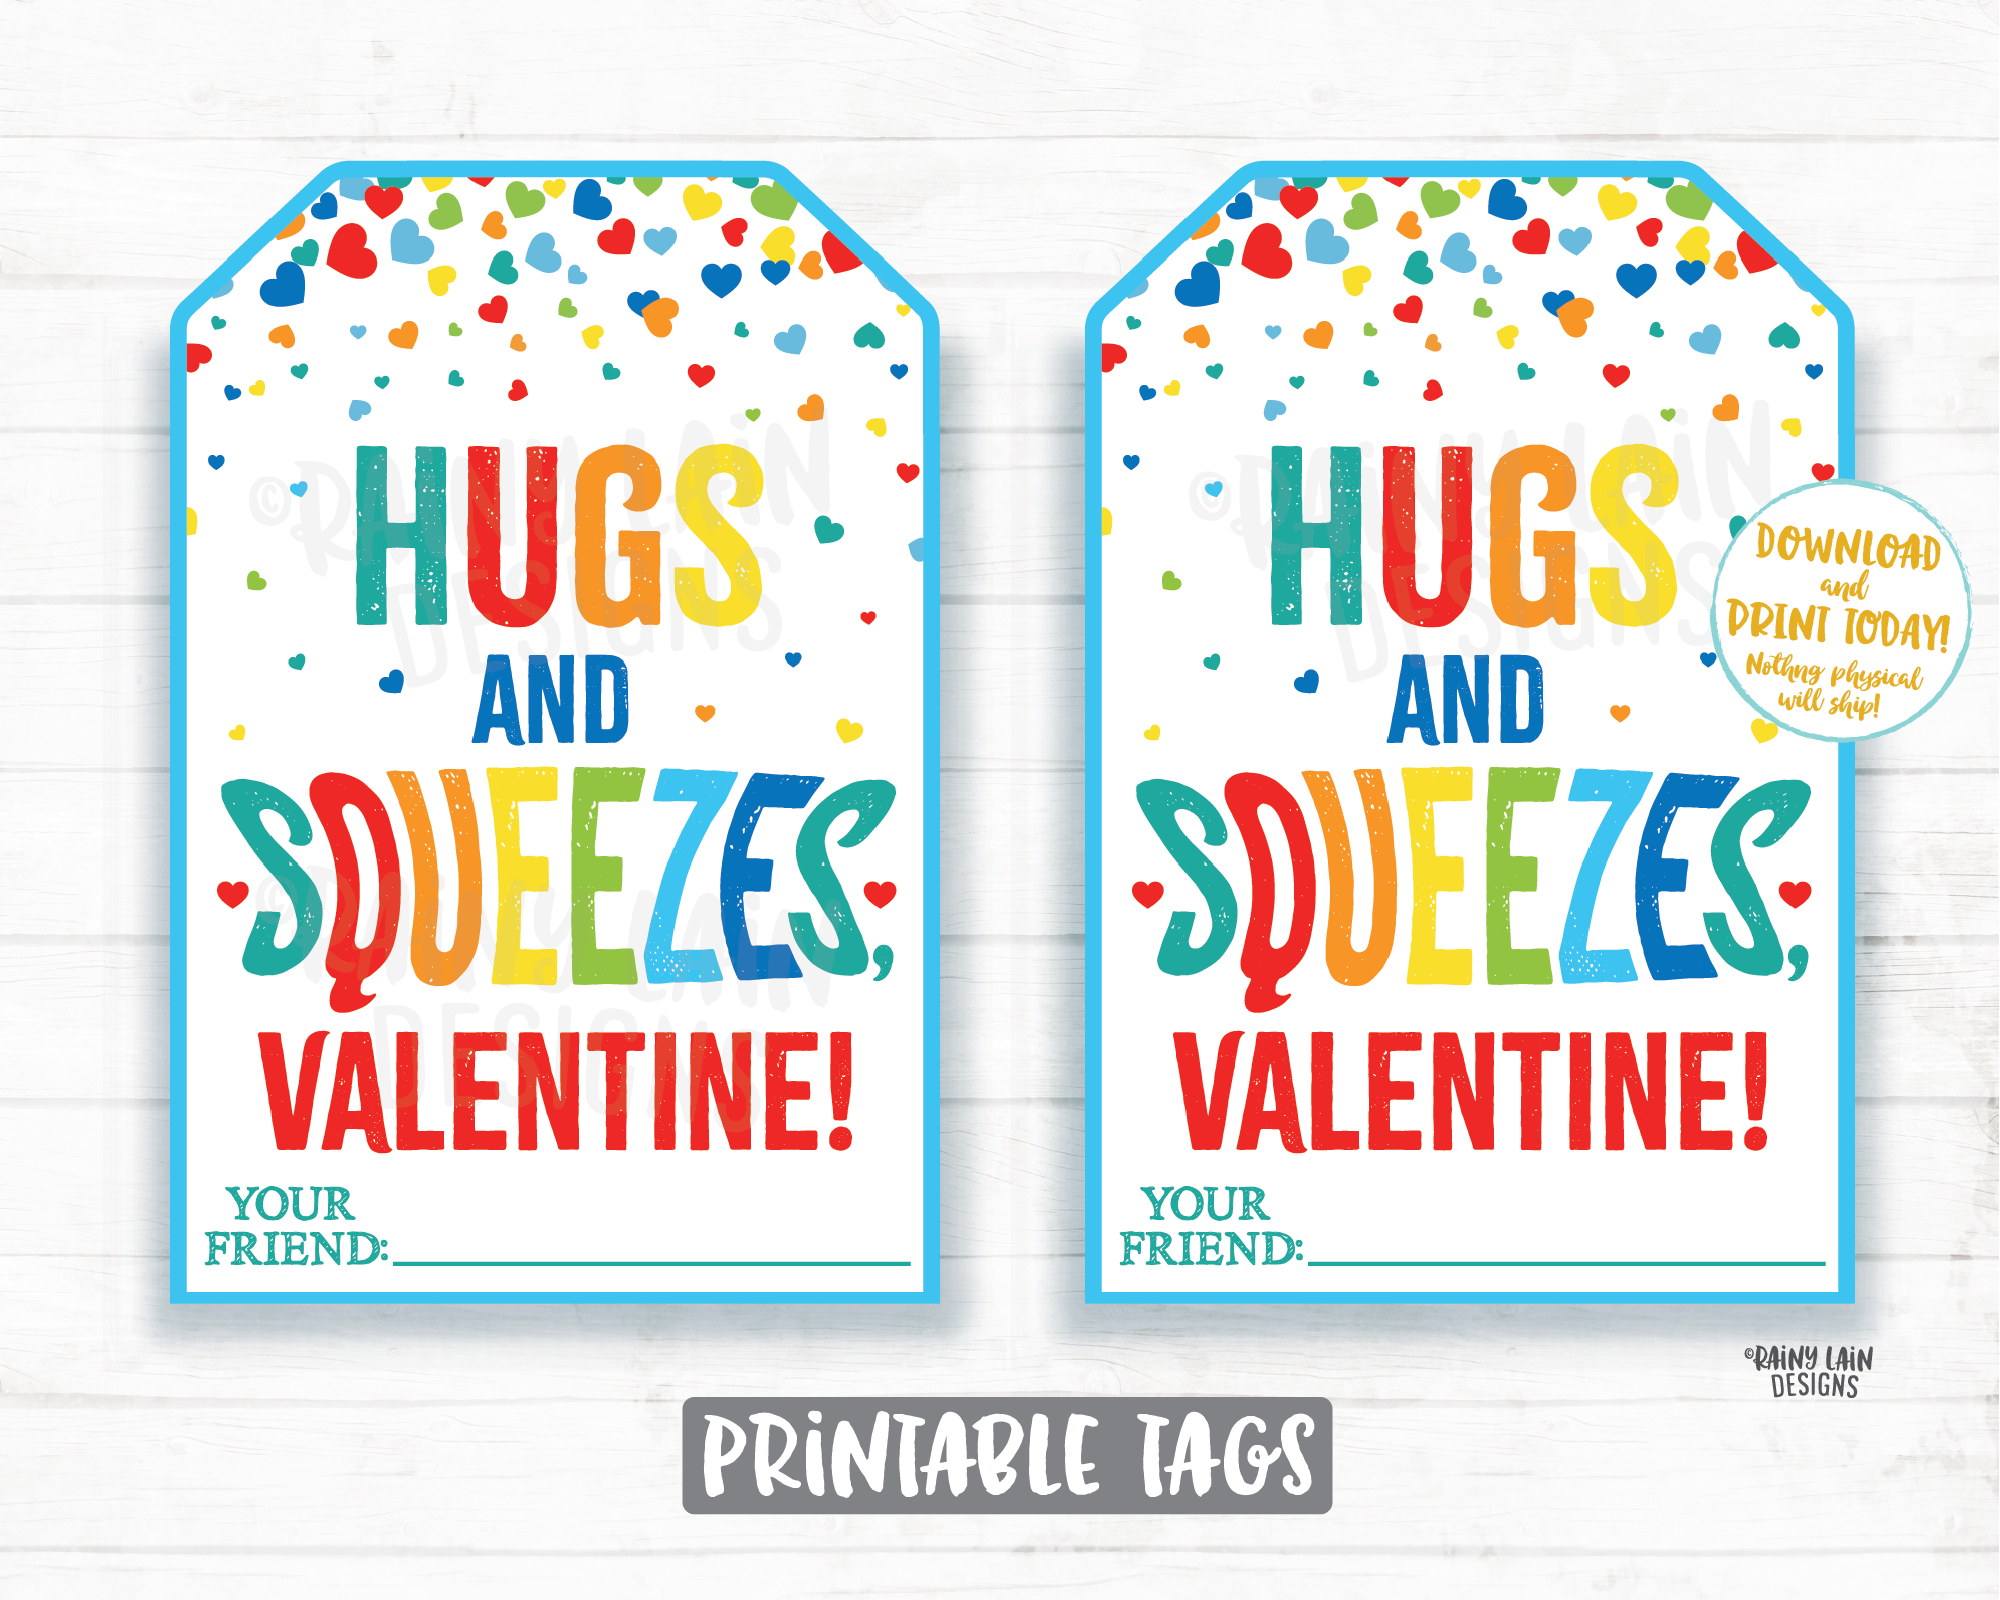 Hugs and Squeezes Valentine Squishies Applesauce Squishy Toy Squishee Squeeze Preschool Classroom Printable Kids Non-Candy Valentine Tag